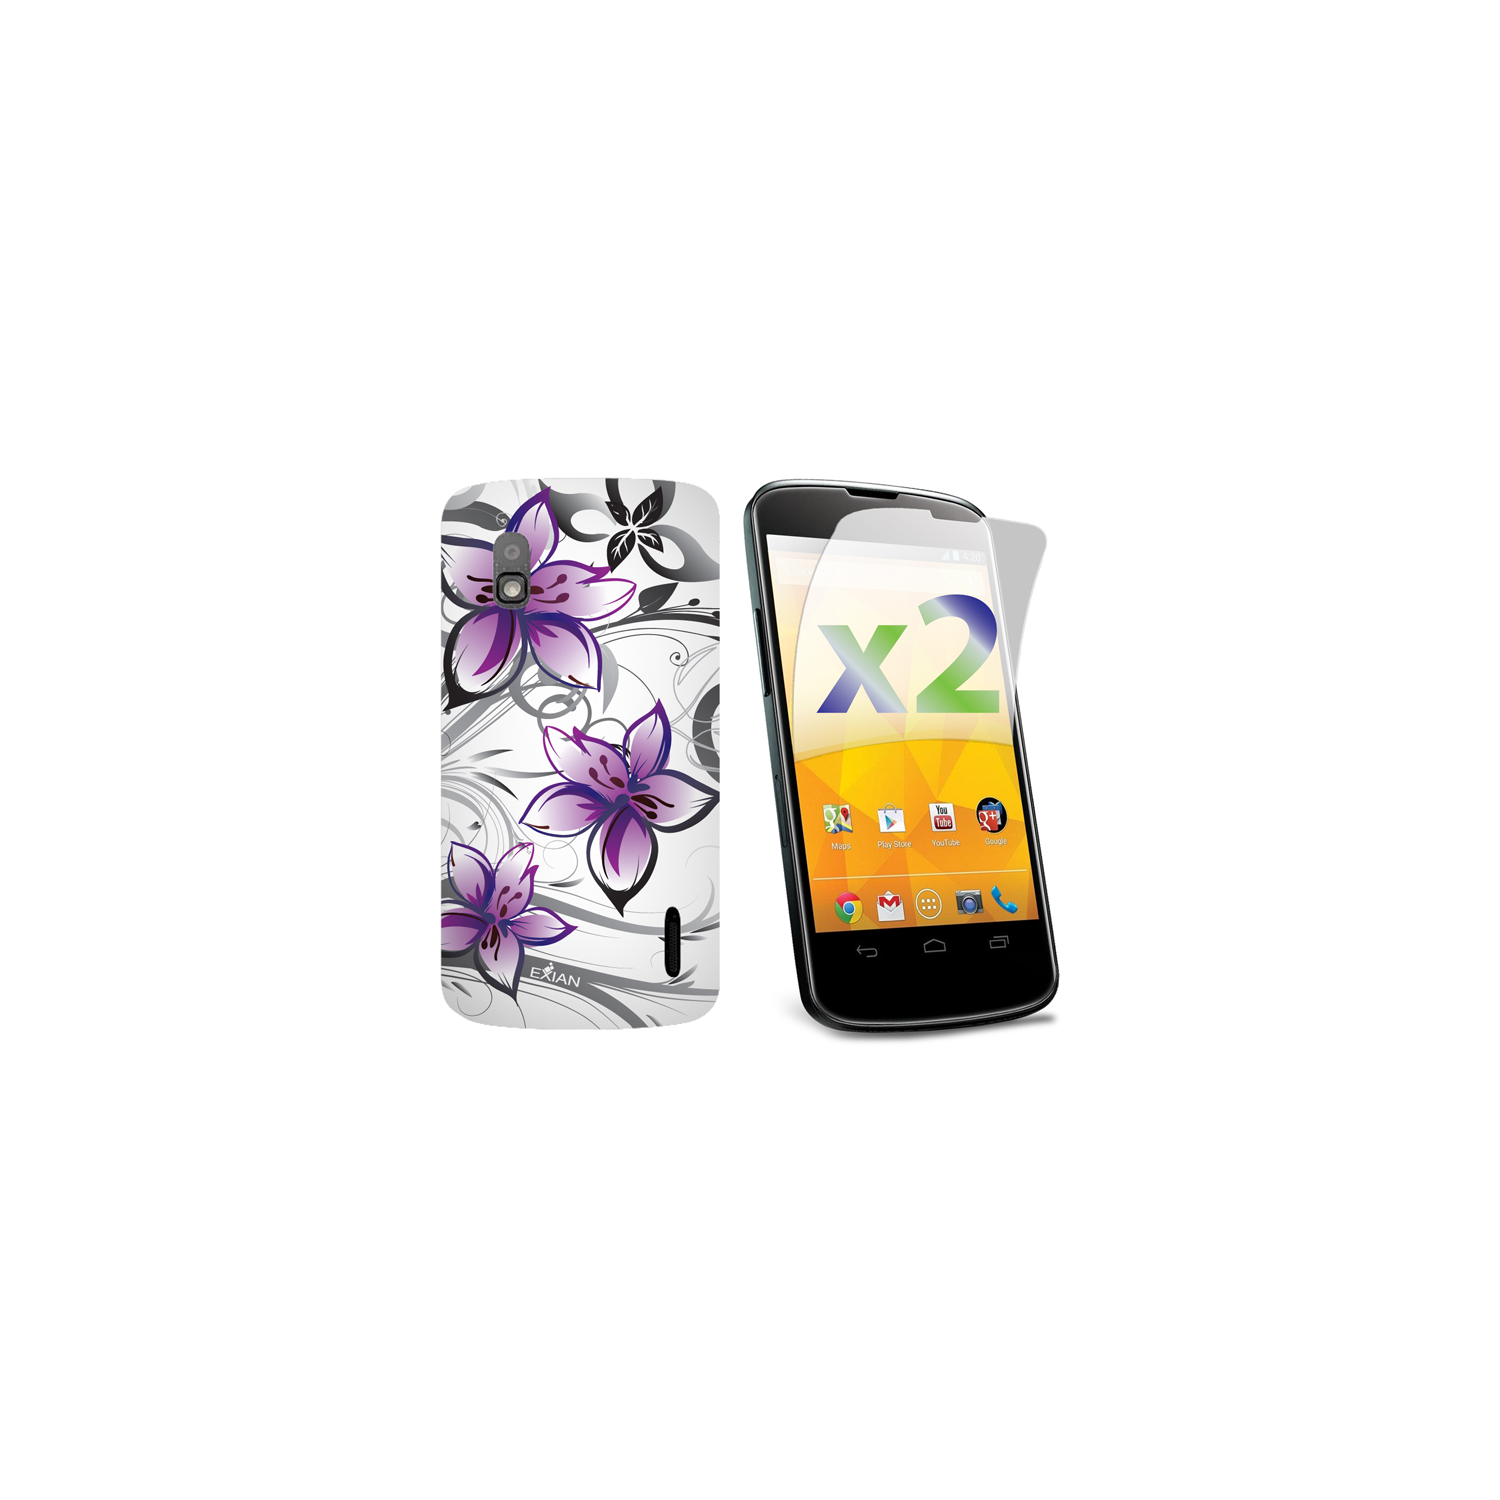 Exian Google LG Nexus 4 Screen Protectors X 2 and TPU Case Exian Design Purple Floral on White